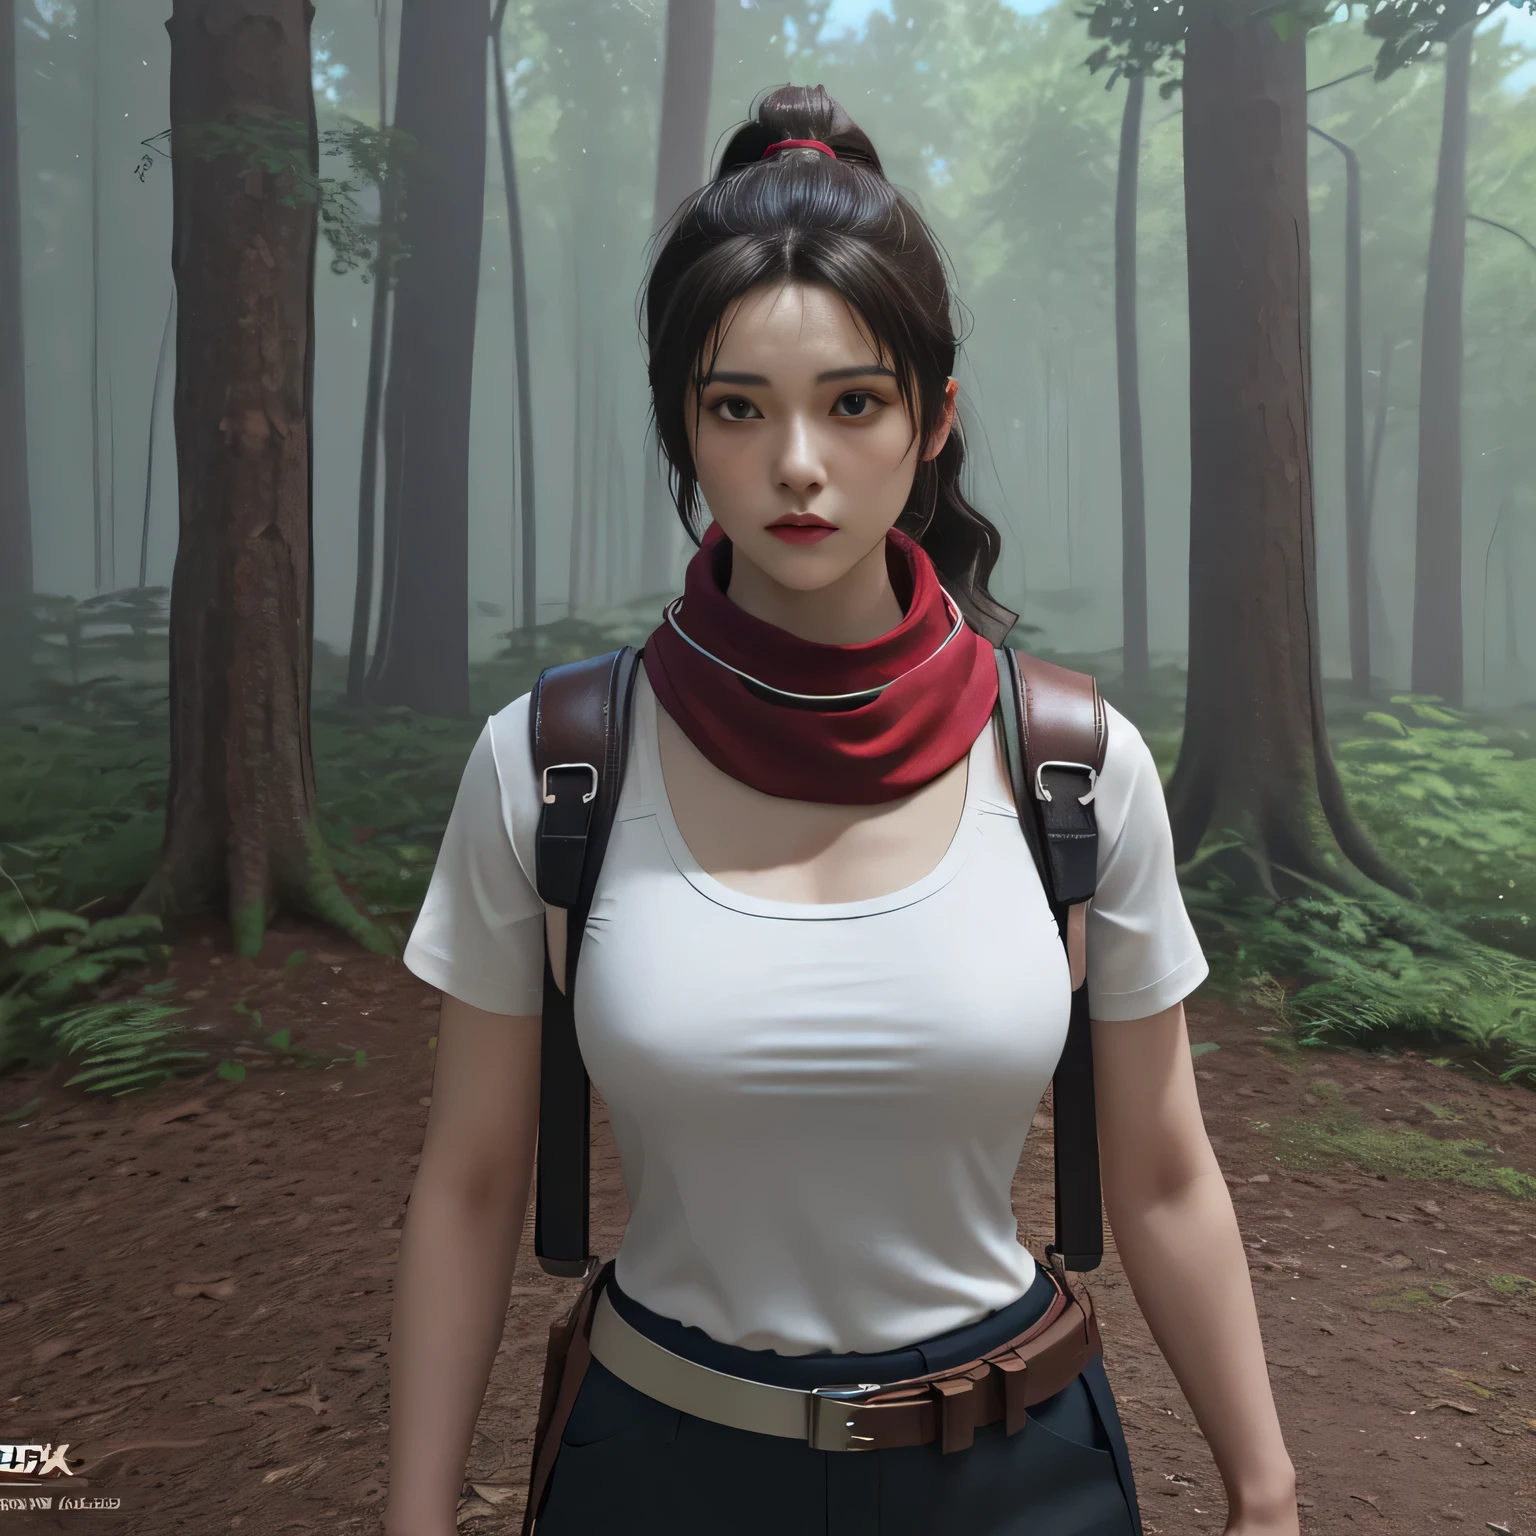 masterpiece, best quality, (solo), 1girl, Prepare for battle,araffe in a white outfit with purple glove, wraith from apex legends, Toned body,Red scarf,Suspenders trousers,white T-shirt,belt, bib shorts,black pants,black shorts,ninja suit,Kunai in the hand,black hair, ponytail，gauntlets, Red scarf, white T-shirt,belt, bib shorts,science_fiction, outdoors, forest, apex legends character, loba andrade from apex legends, apex legends concept art, makoto shinkai ( apex legends ), in style of apex legends, apex legends armor, portrait of apex legends, official character art, single character concept art, female lead character